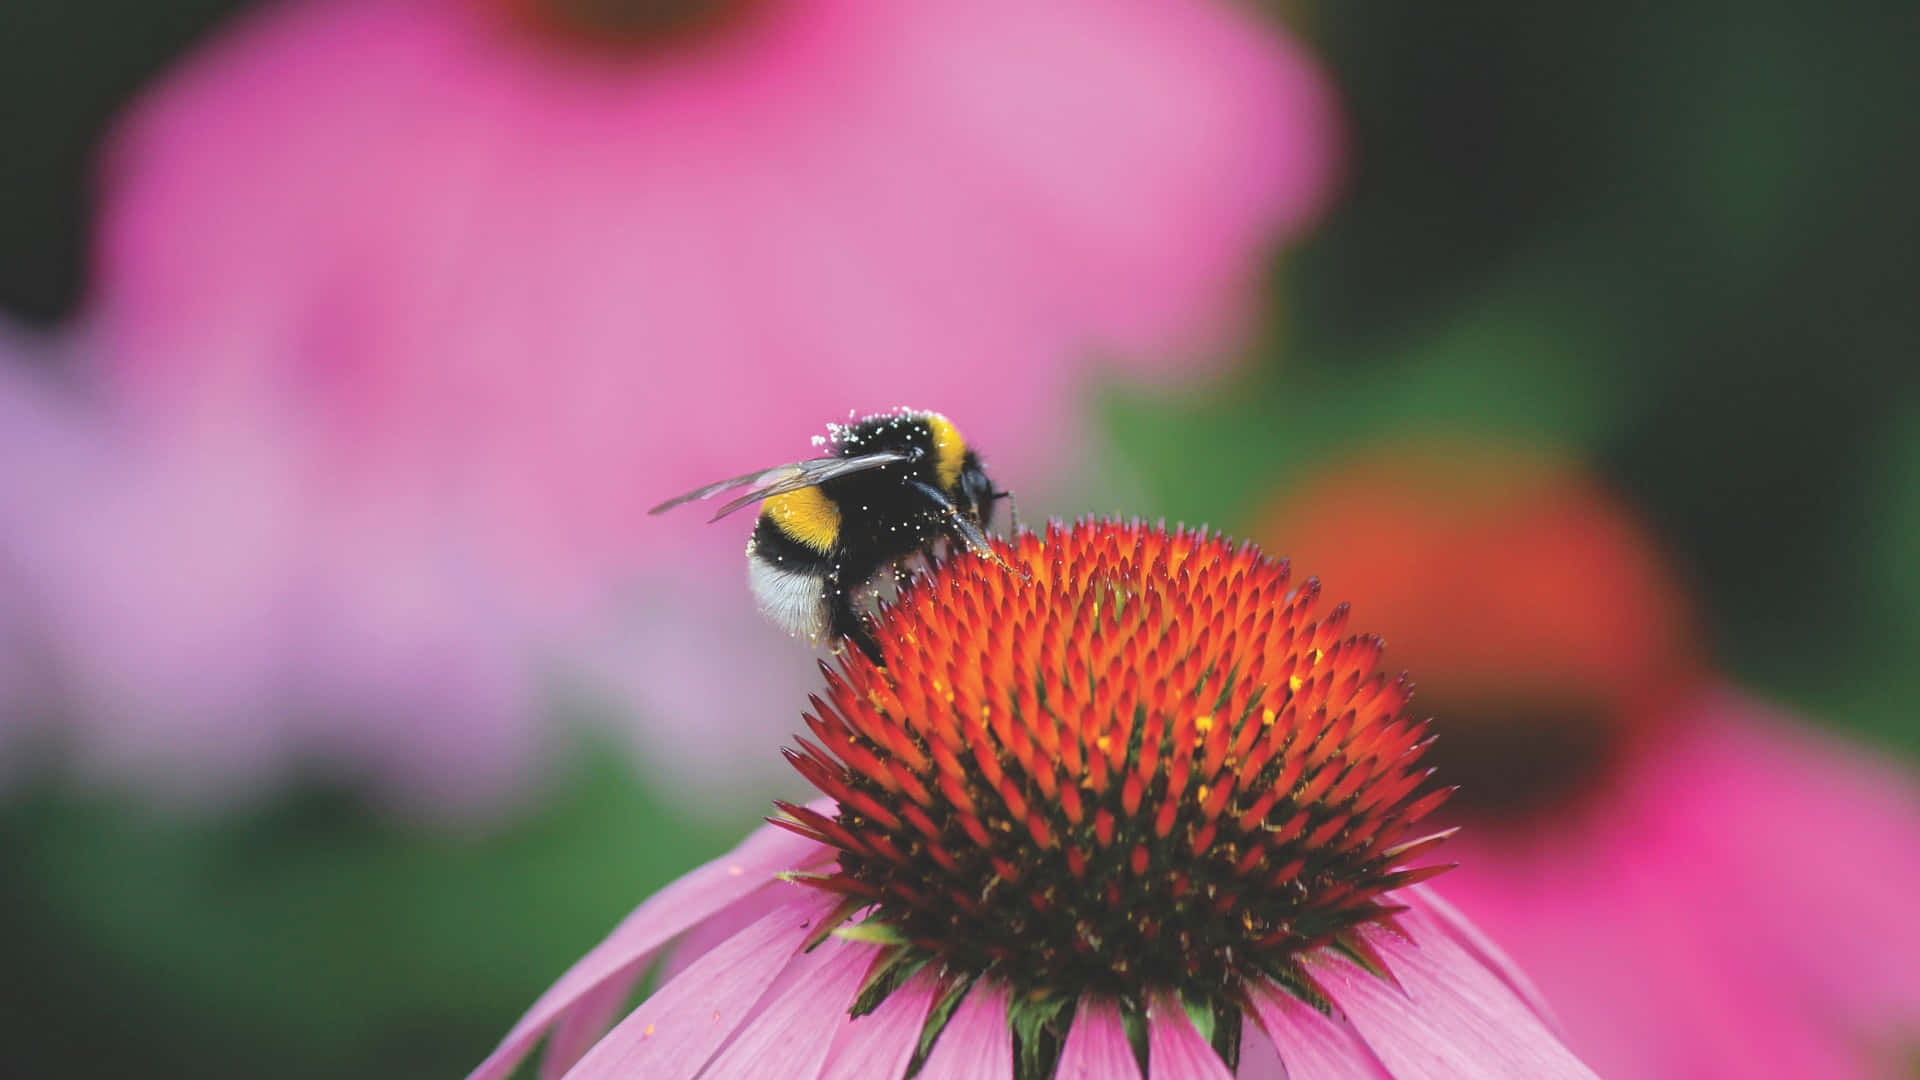 Red-tailed Bumblebee Wallpaper